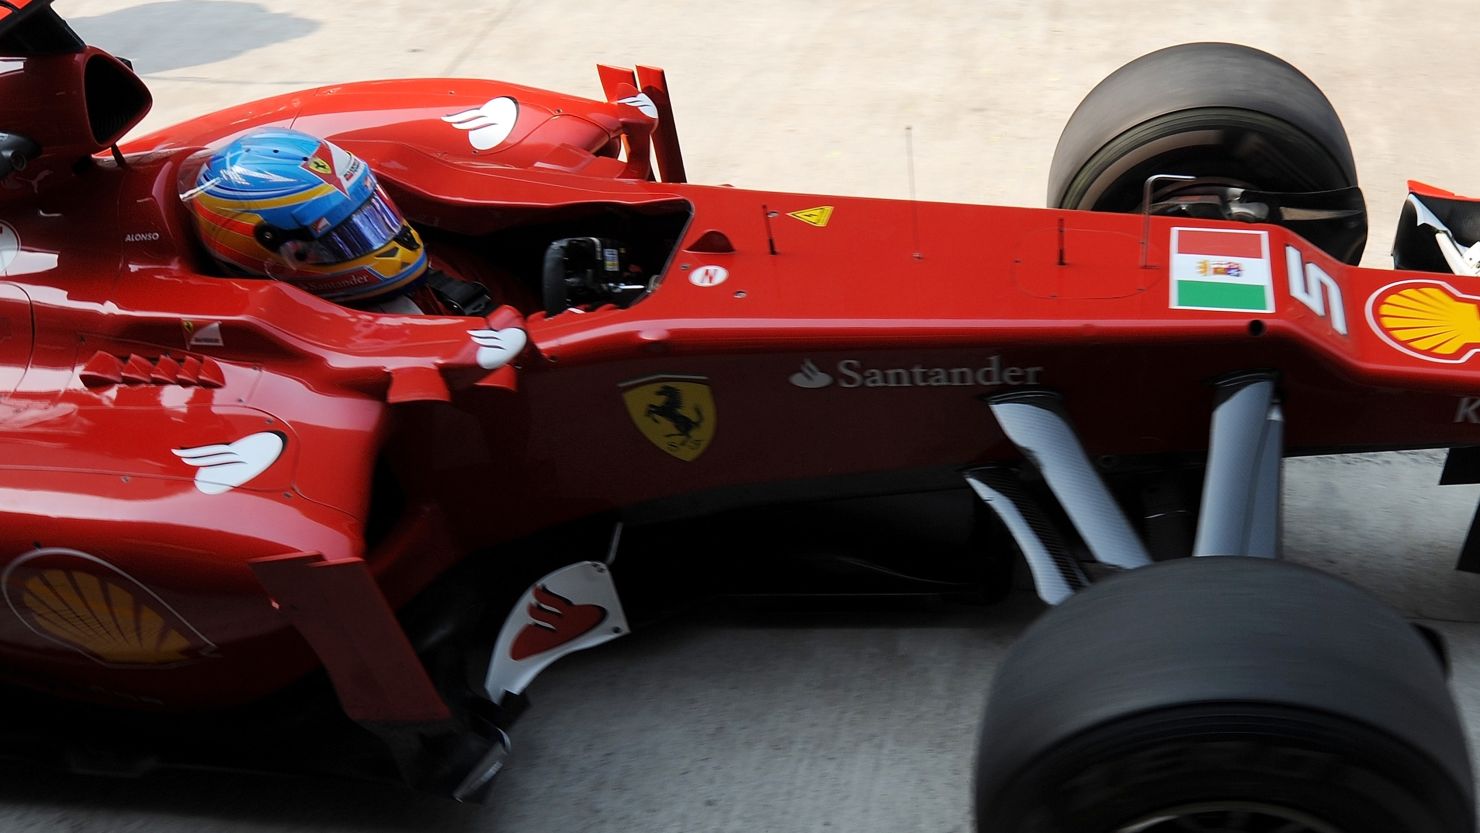 The Italian navy's flag is featured on Ferrari's cars for the Indian Grand Prix in New Delhi 